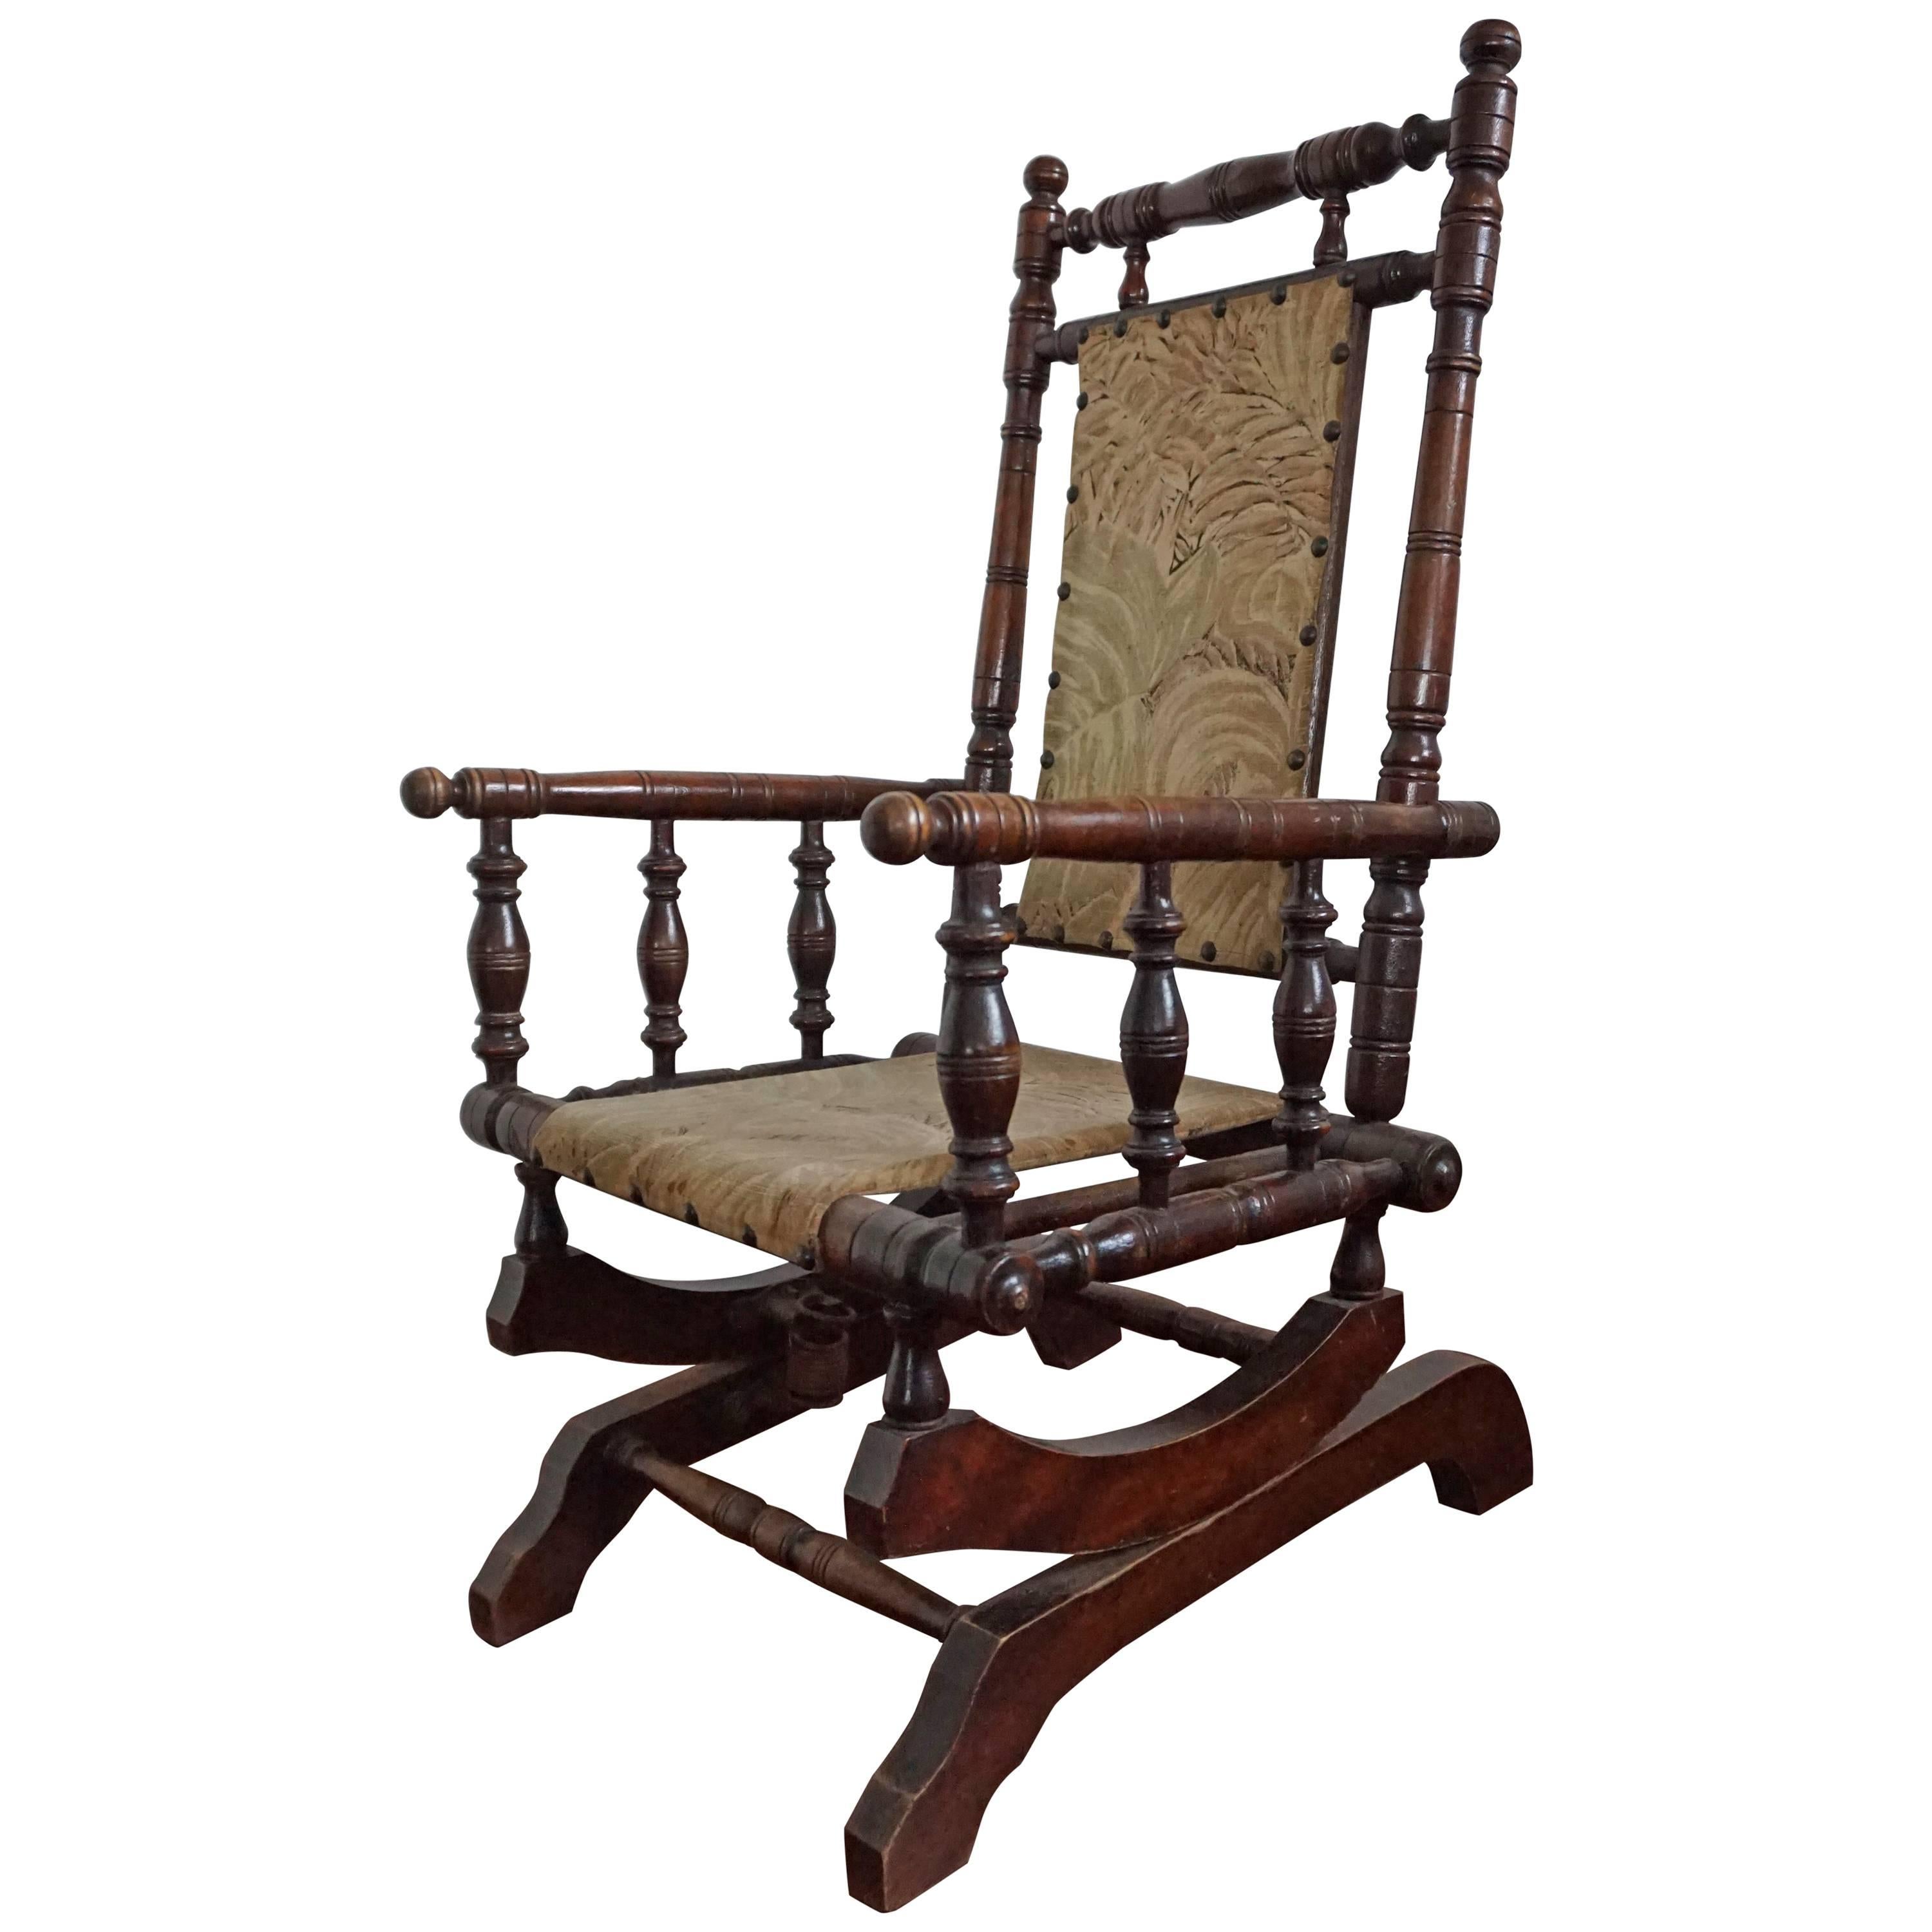 Rare Antique Rocking Chair For Children American Rocker For Child Or Toy Bear For Sale At 1stdibs